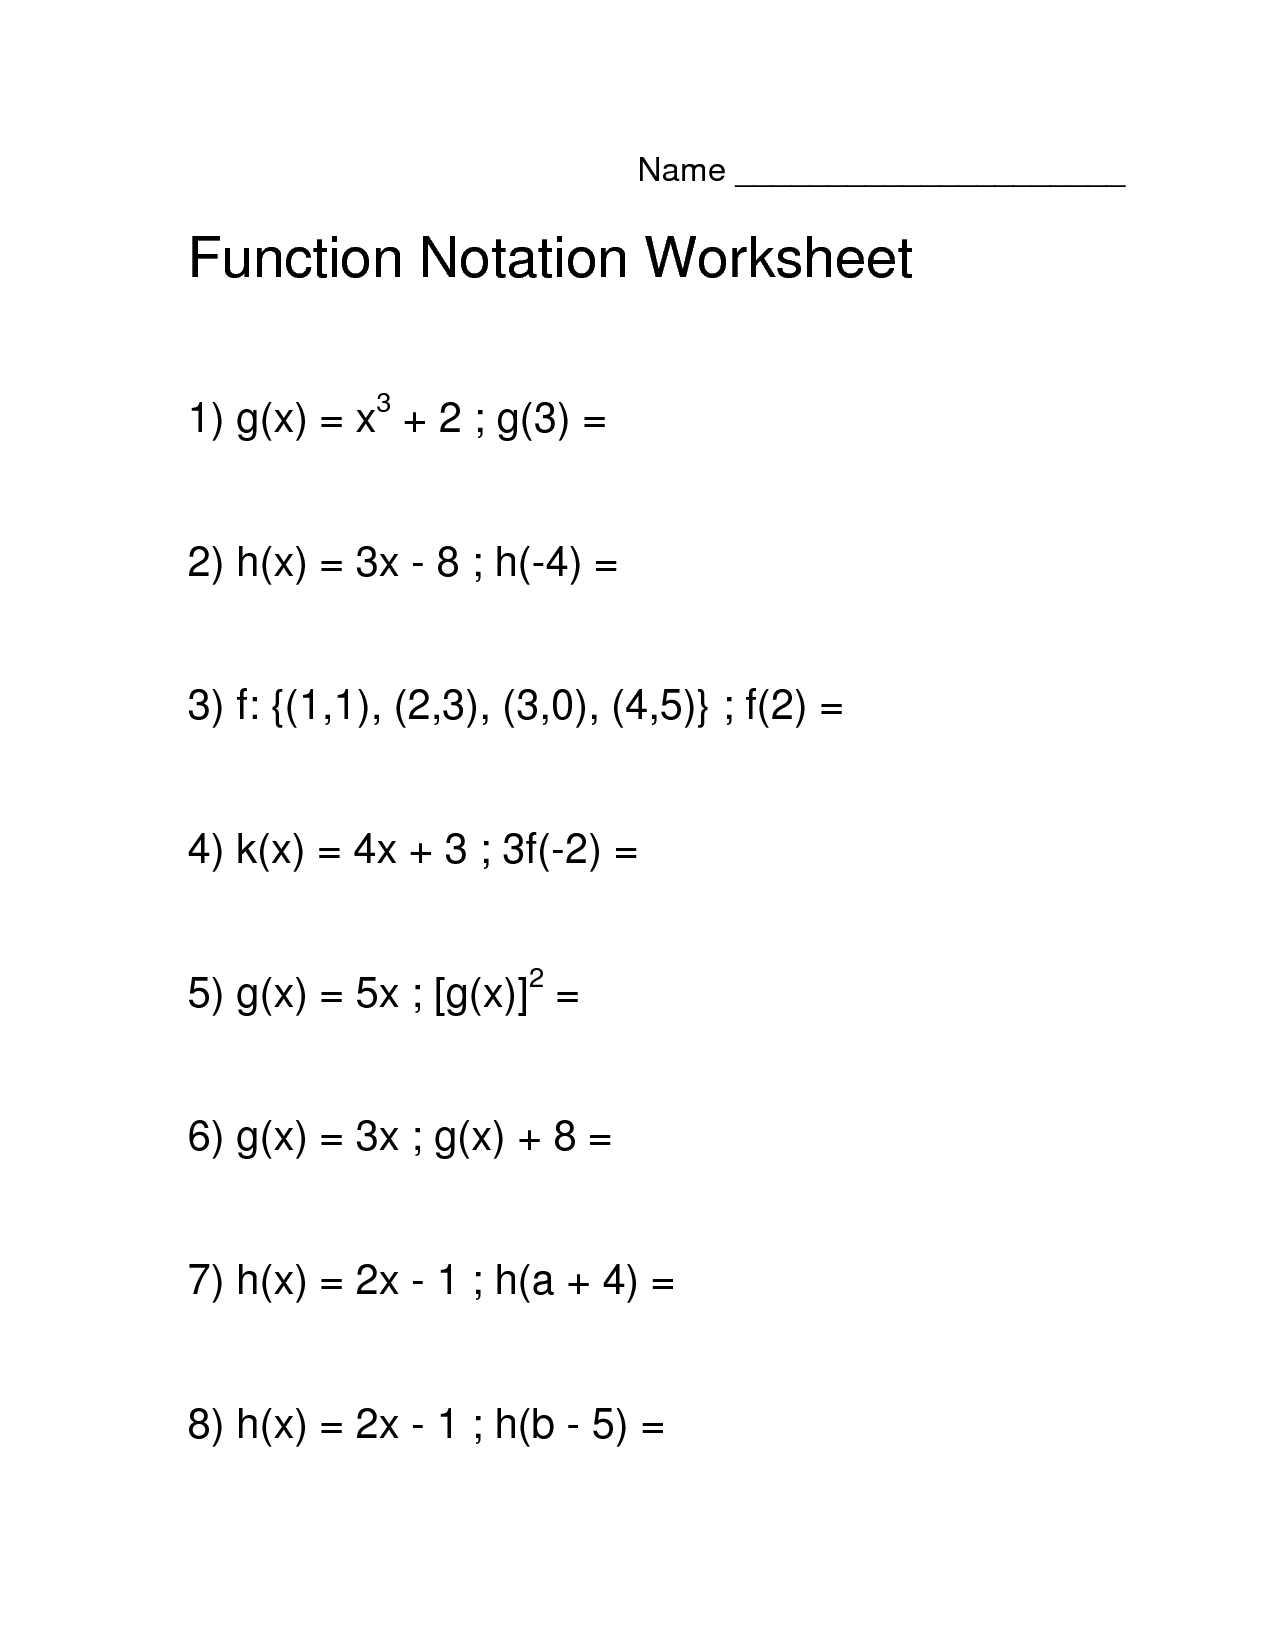 Function Notation Worksheets With Answers